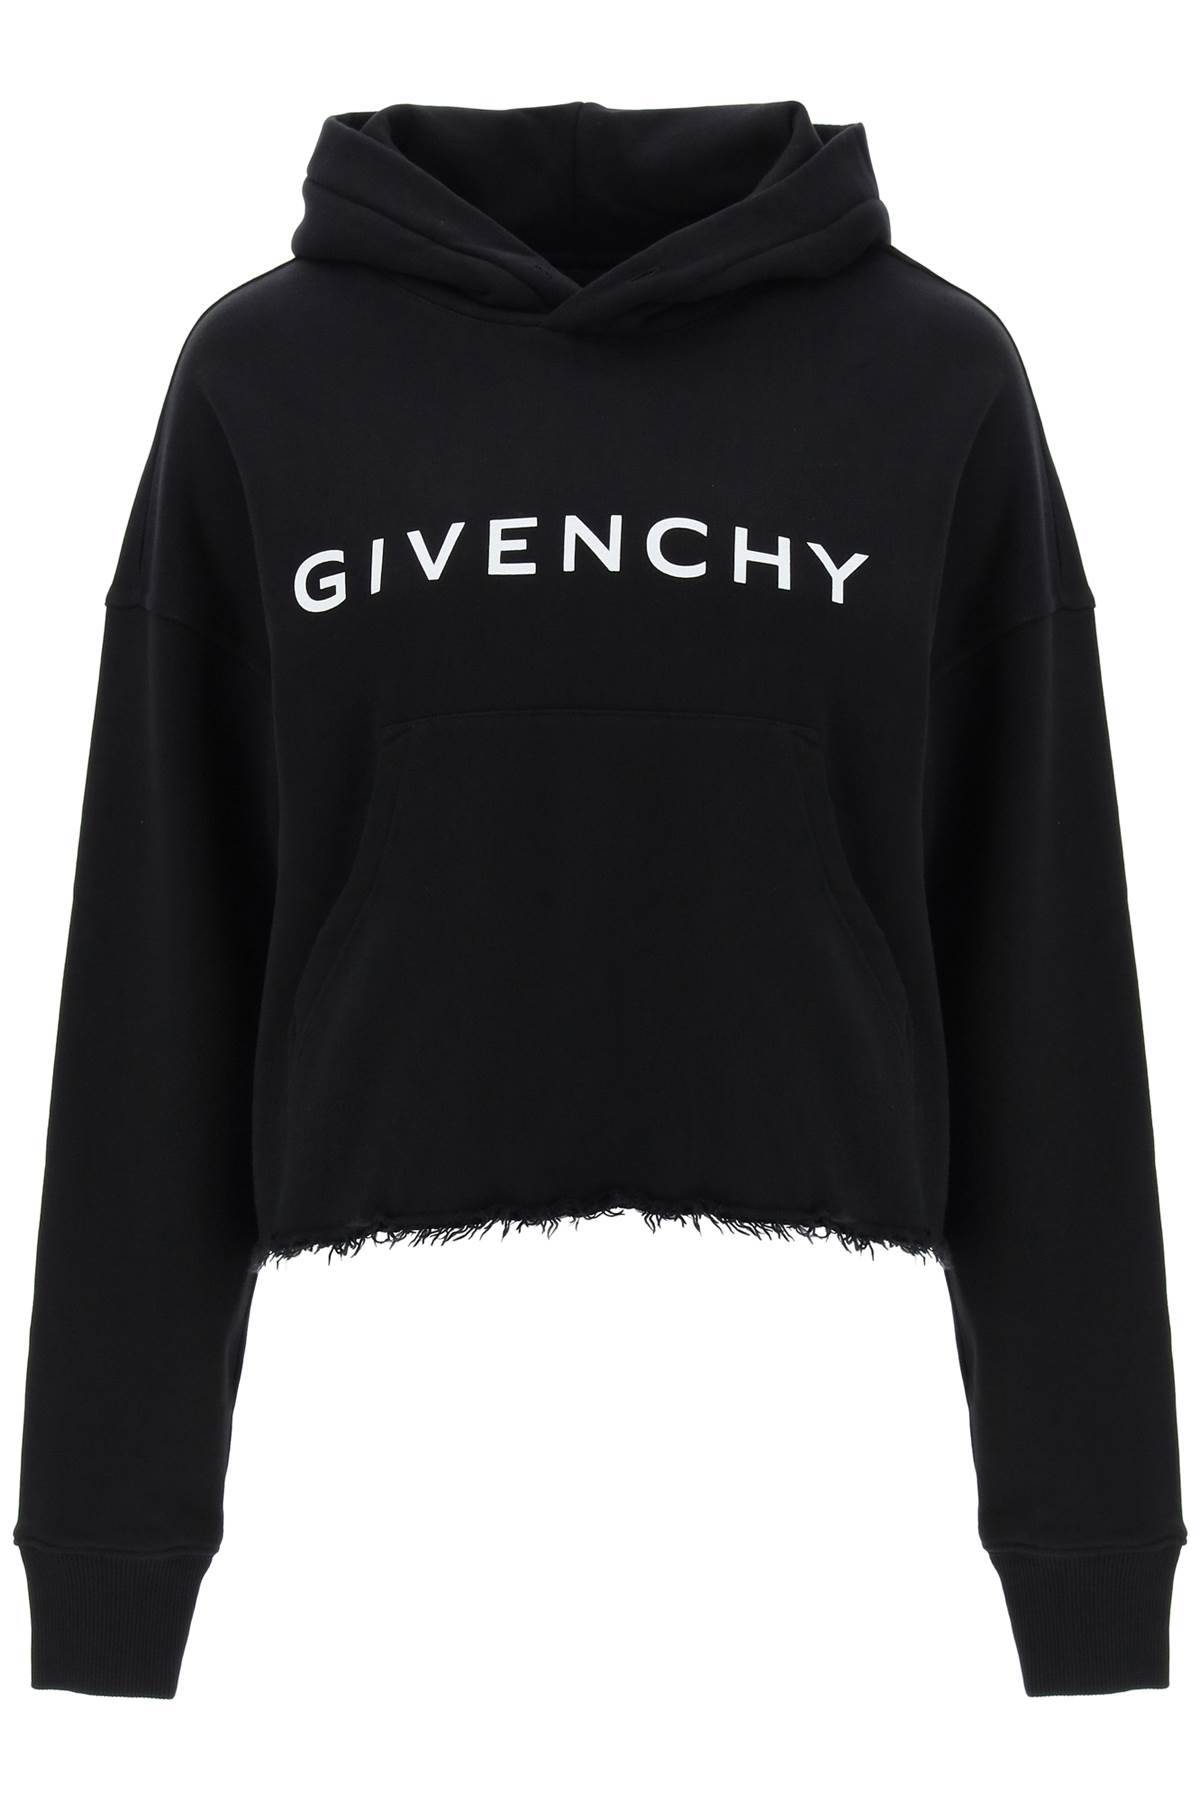 Givenchy GIVENCHY cropped hoodie with logo print